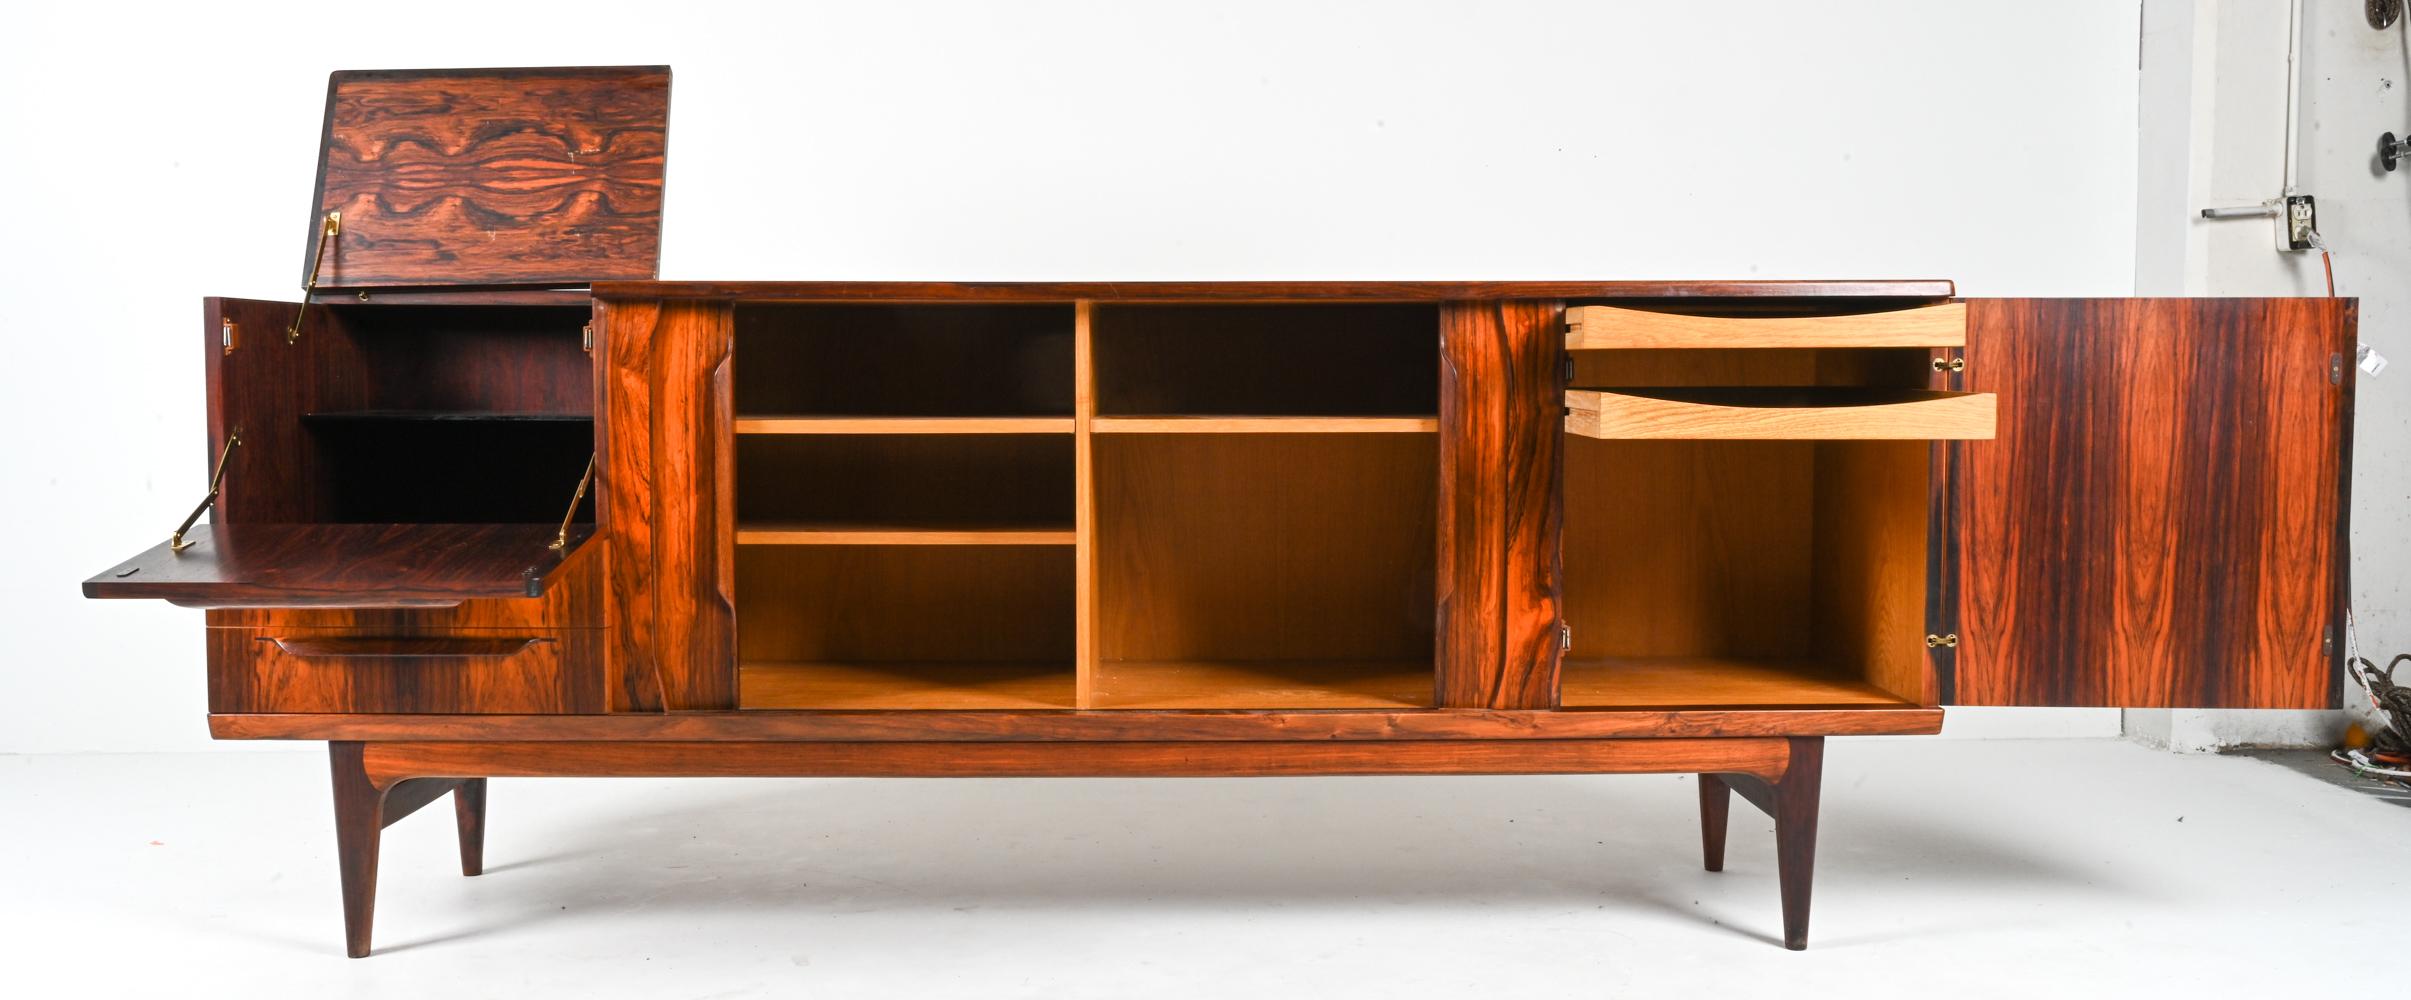 Wood Rare Rosewood Sideboard With Bar by Johannes Andersen; Denmark, c. 1960's For Sale